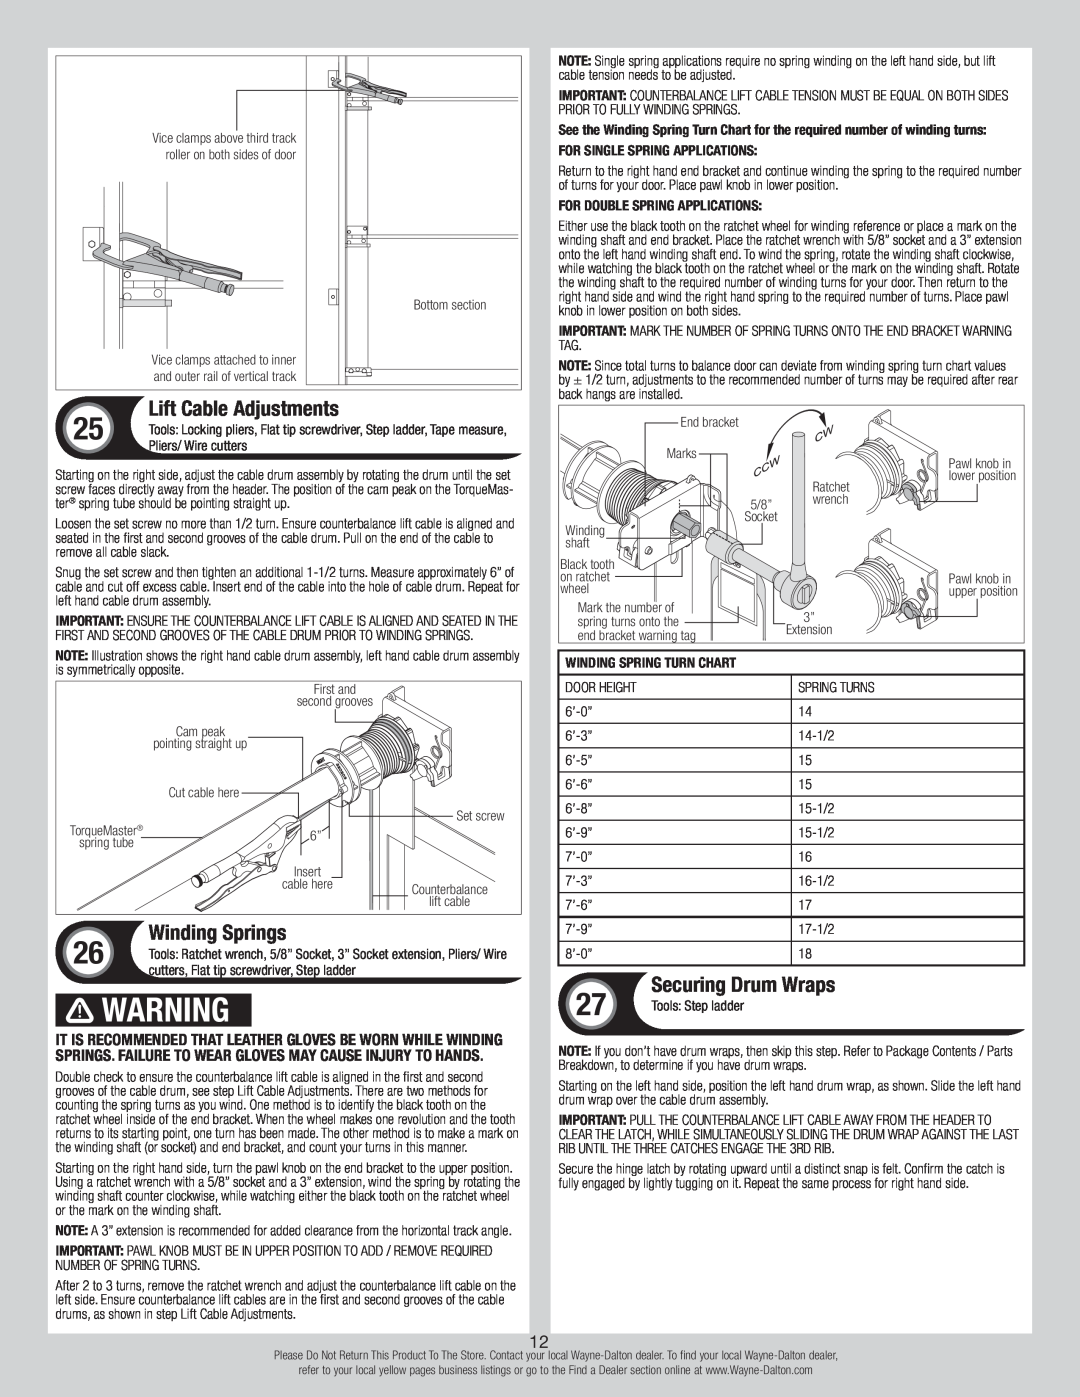 Wayne-Dalton 6100 installation instructions Lift Cable Adjustments, Winding Springs, Securing Drum Wraps 